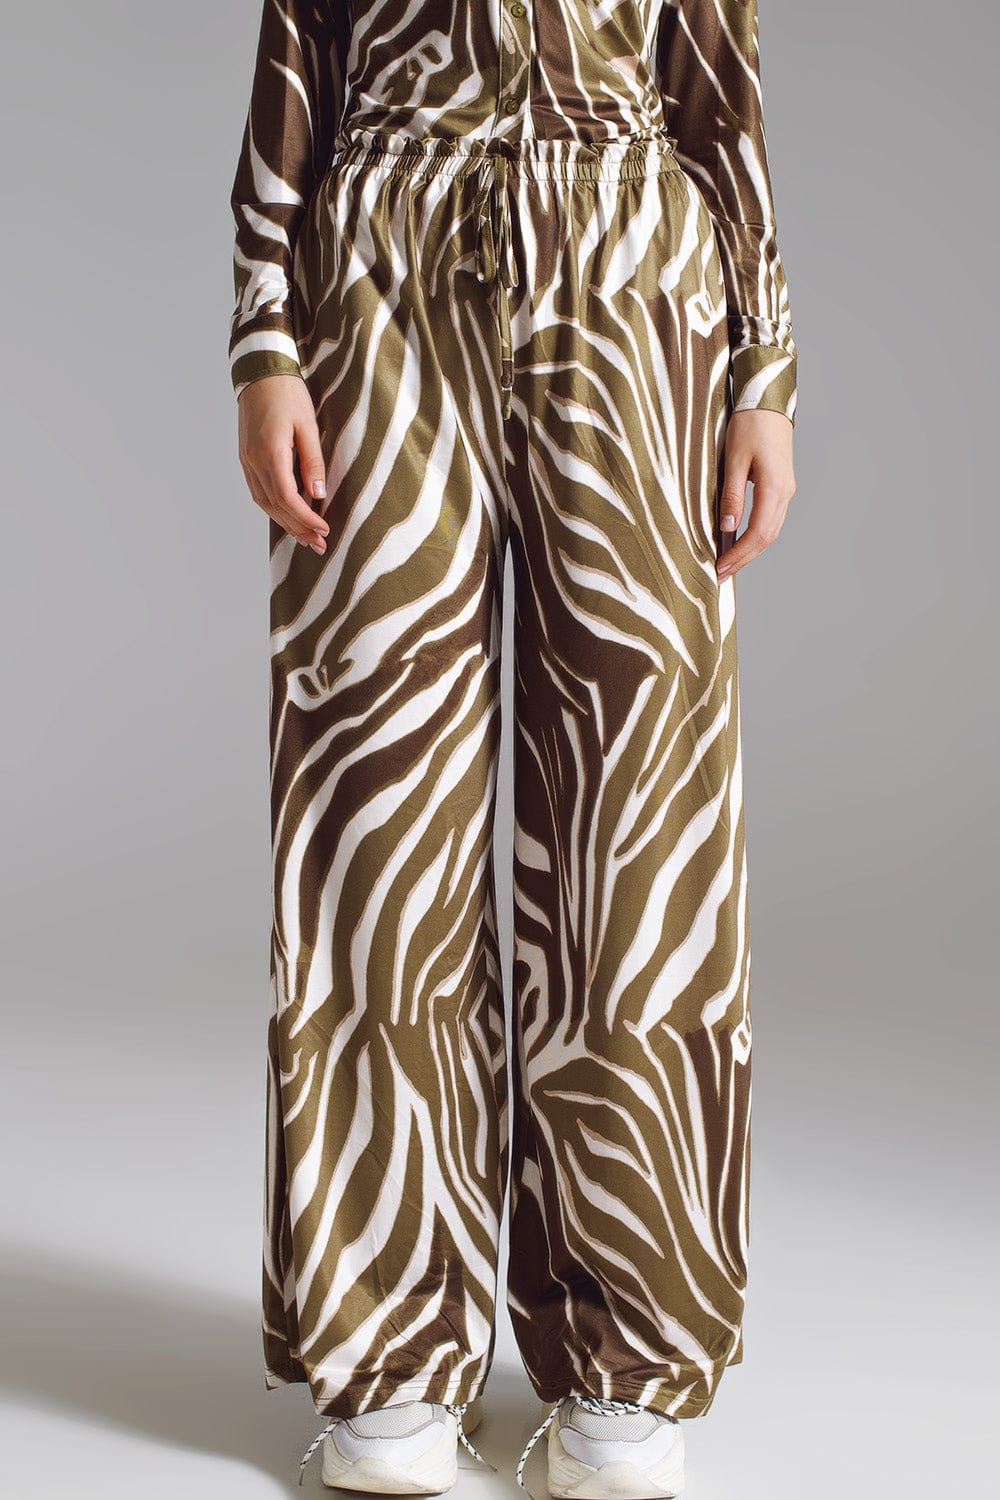 Q2 Women's Pants & Trousers Straight Pants With Zebra Print In Olive Green And White